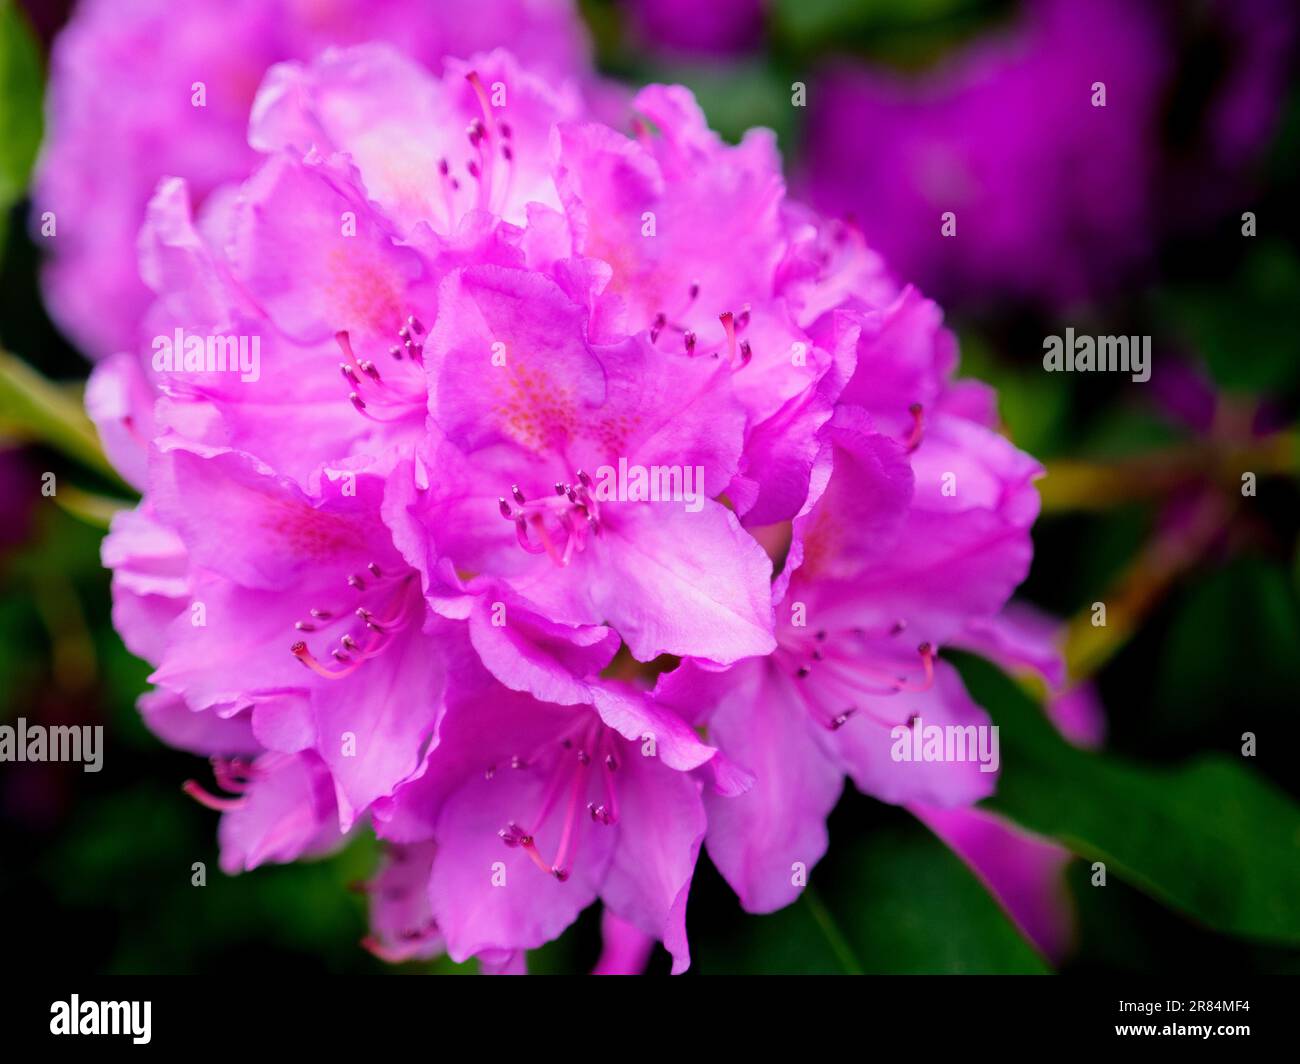 purple blooming rhododendron shrub, flowering plant, close up photo Stock Photo